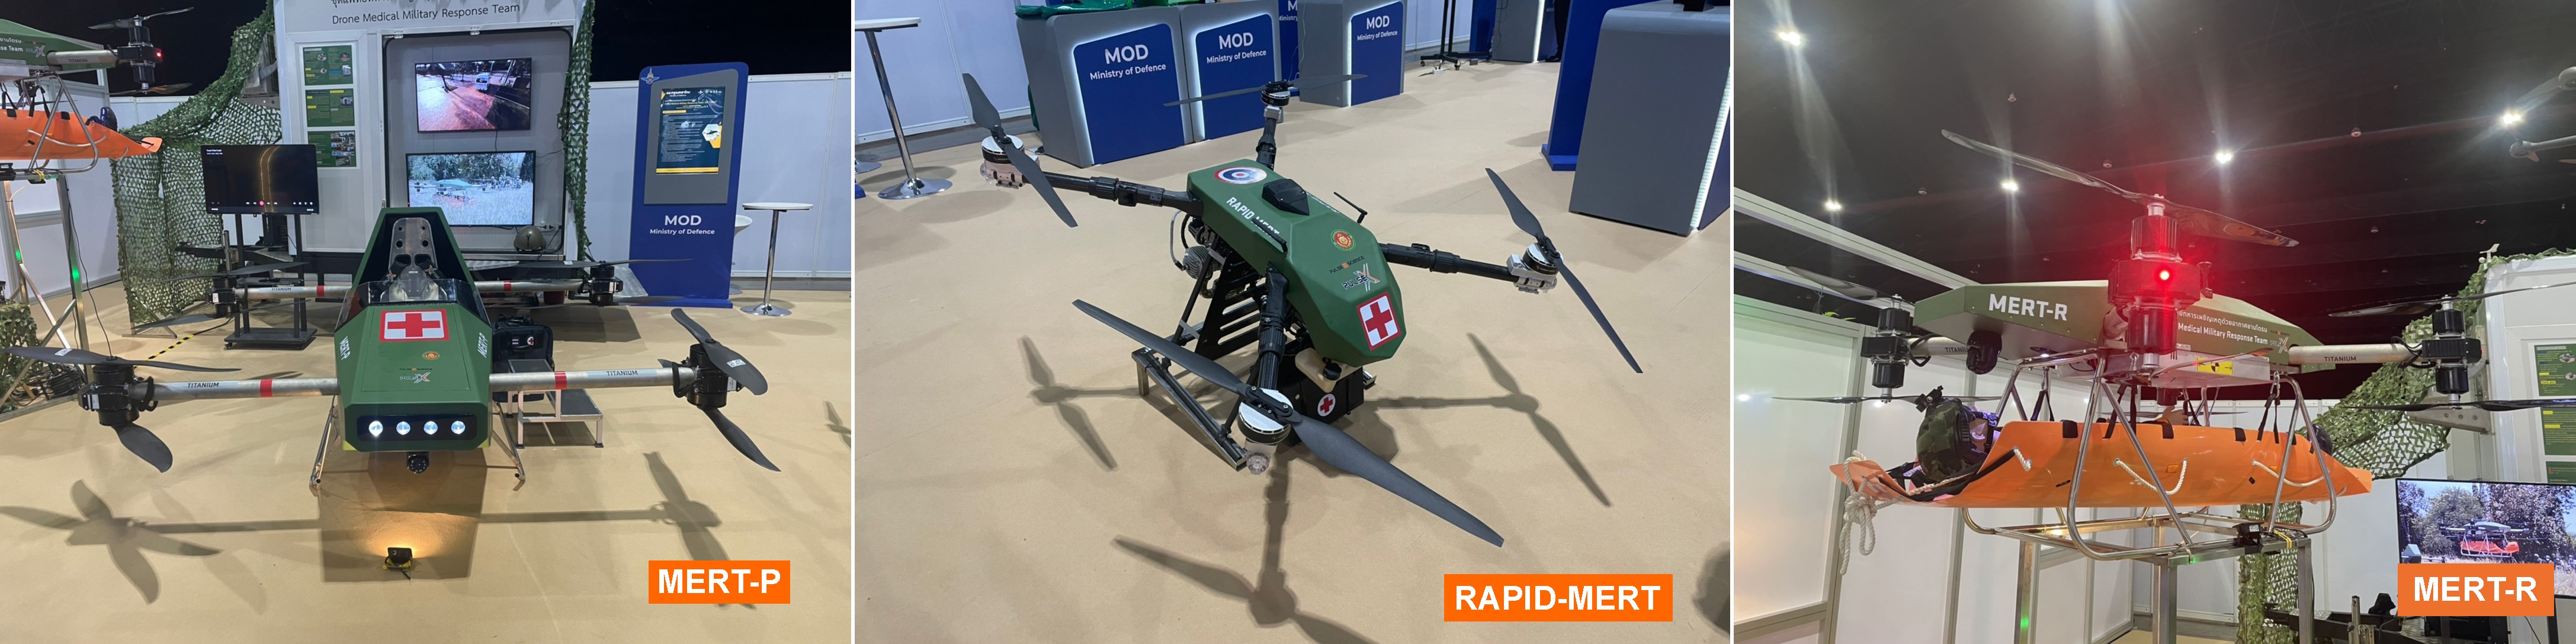 MERT quadcopters for transporting wounded and delivering medical equipment are unveiled